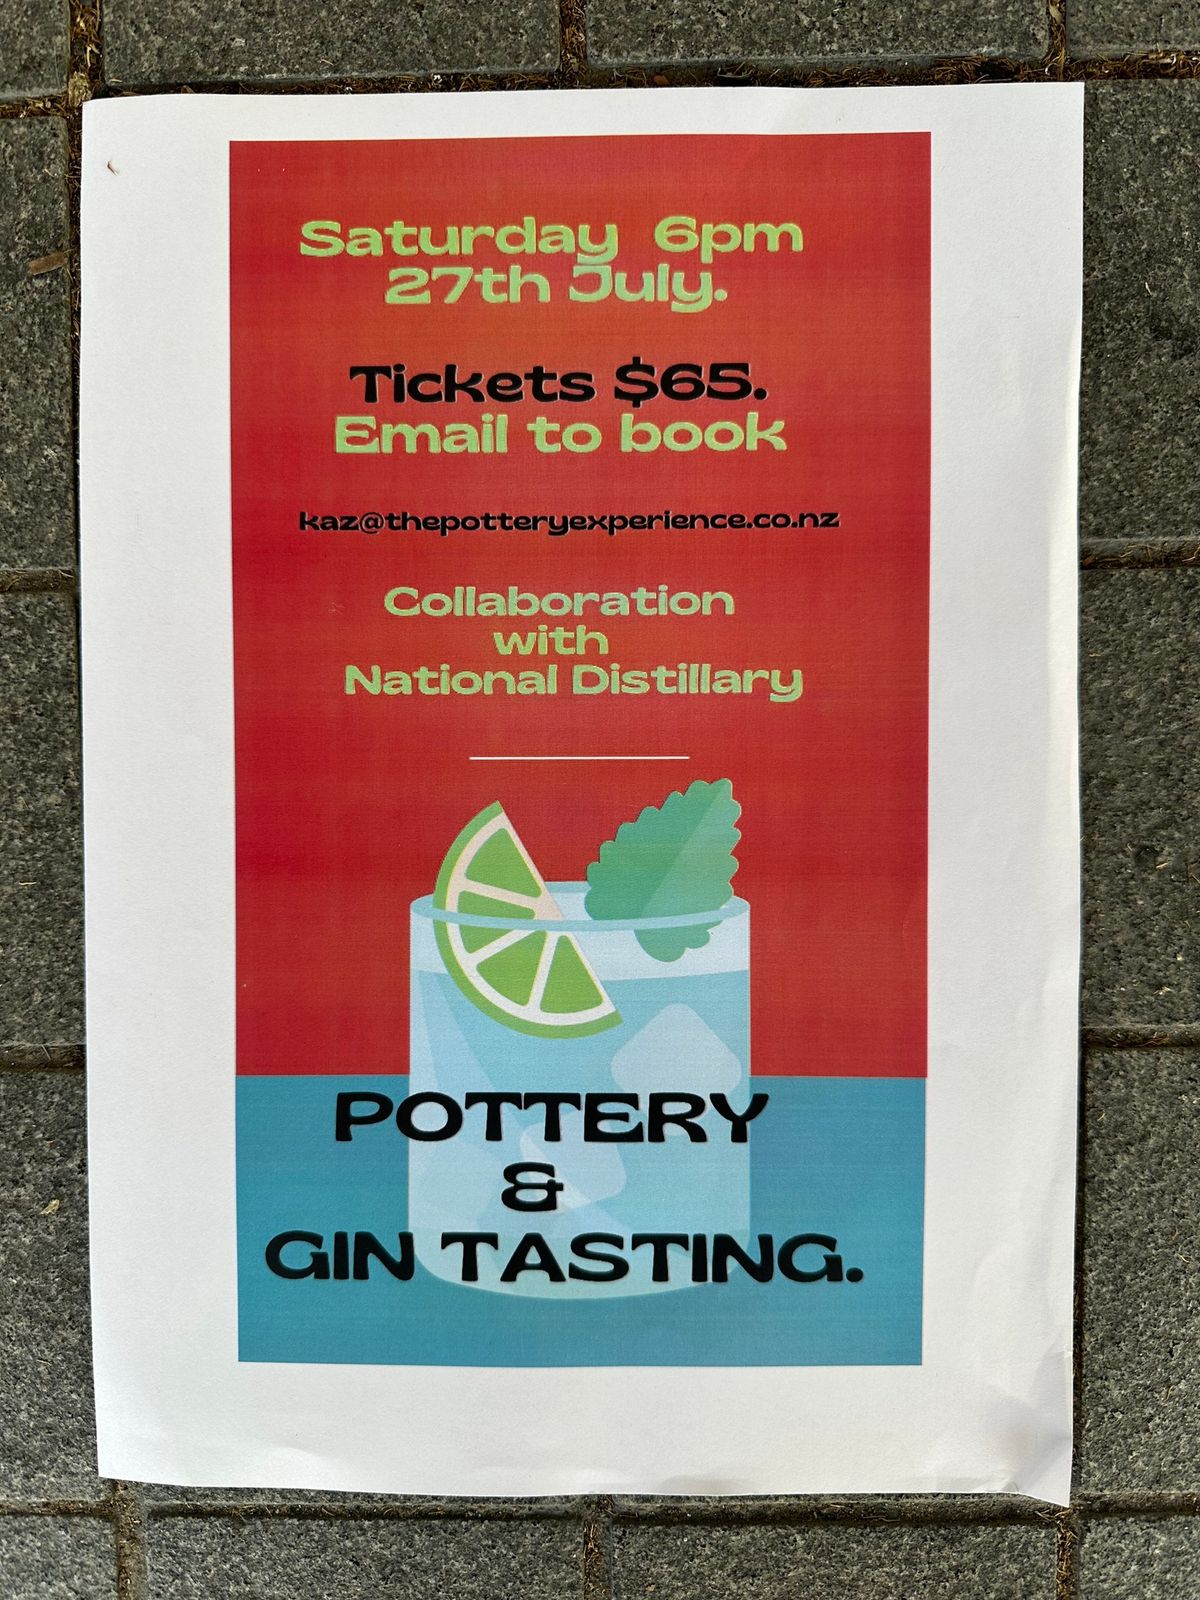 Pottery & Gin Tasting. 